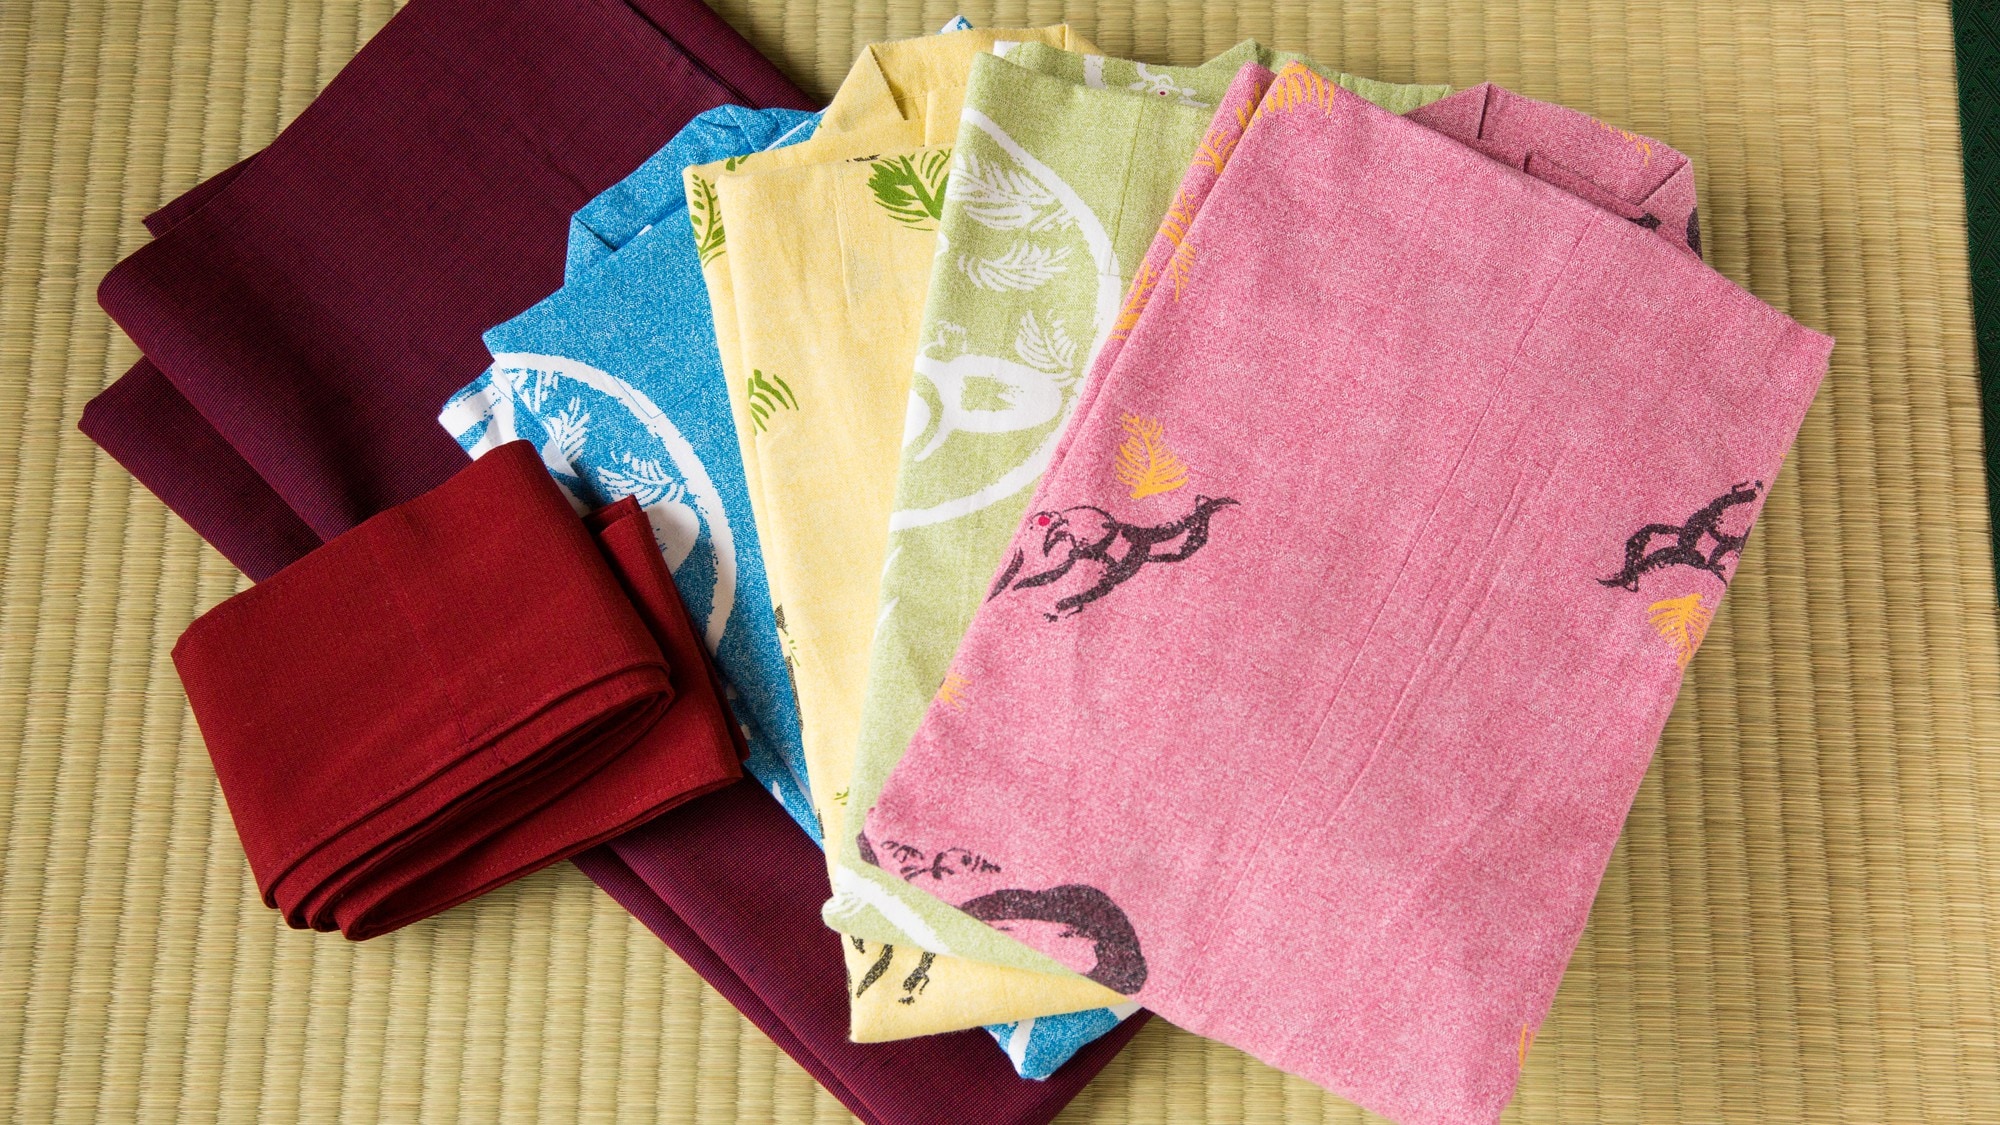 You can choose your favorite color for the yukata.